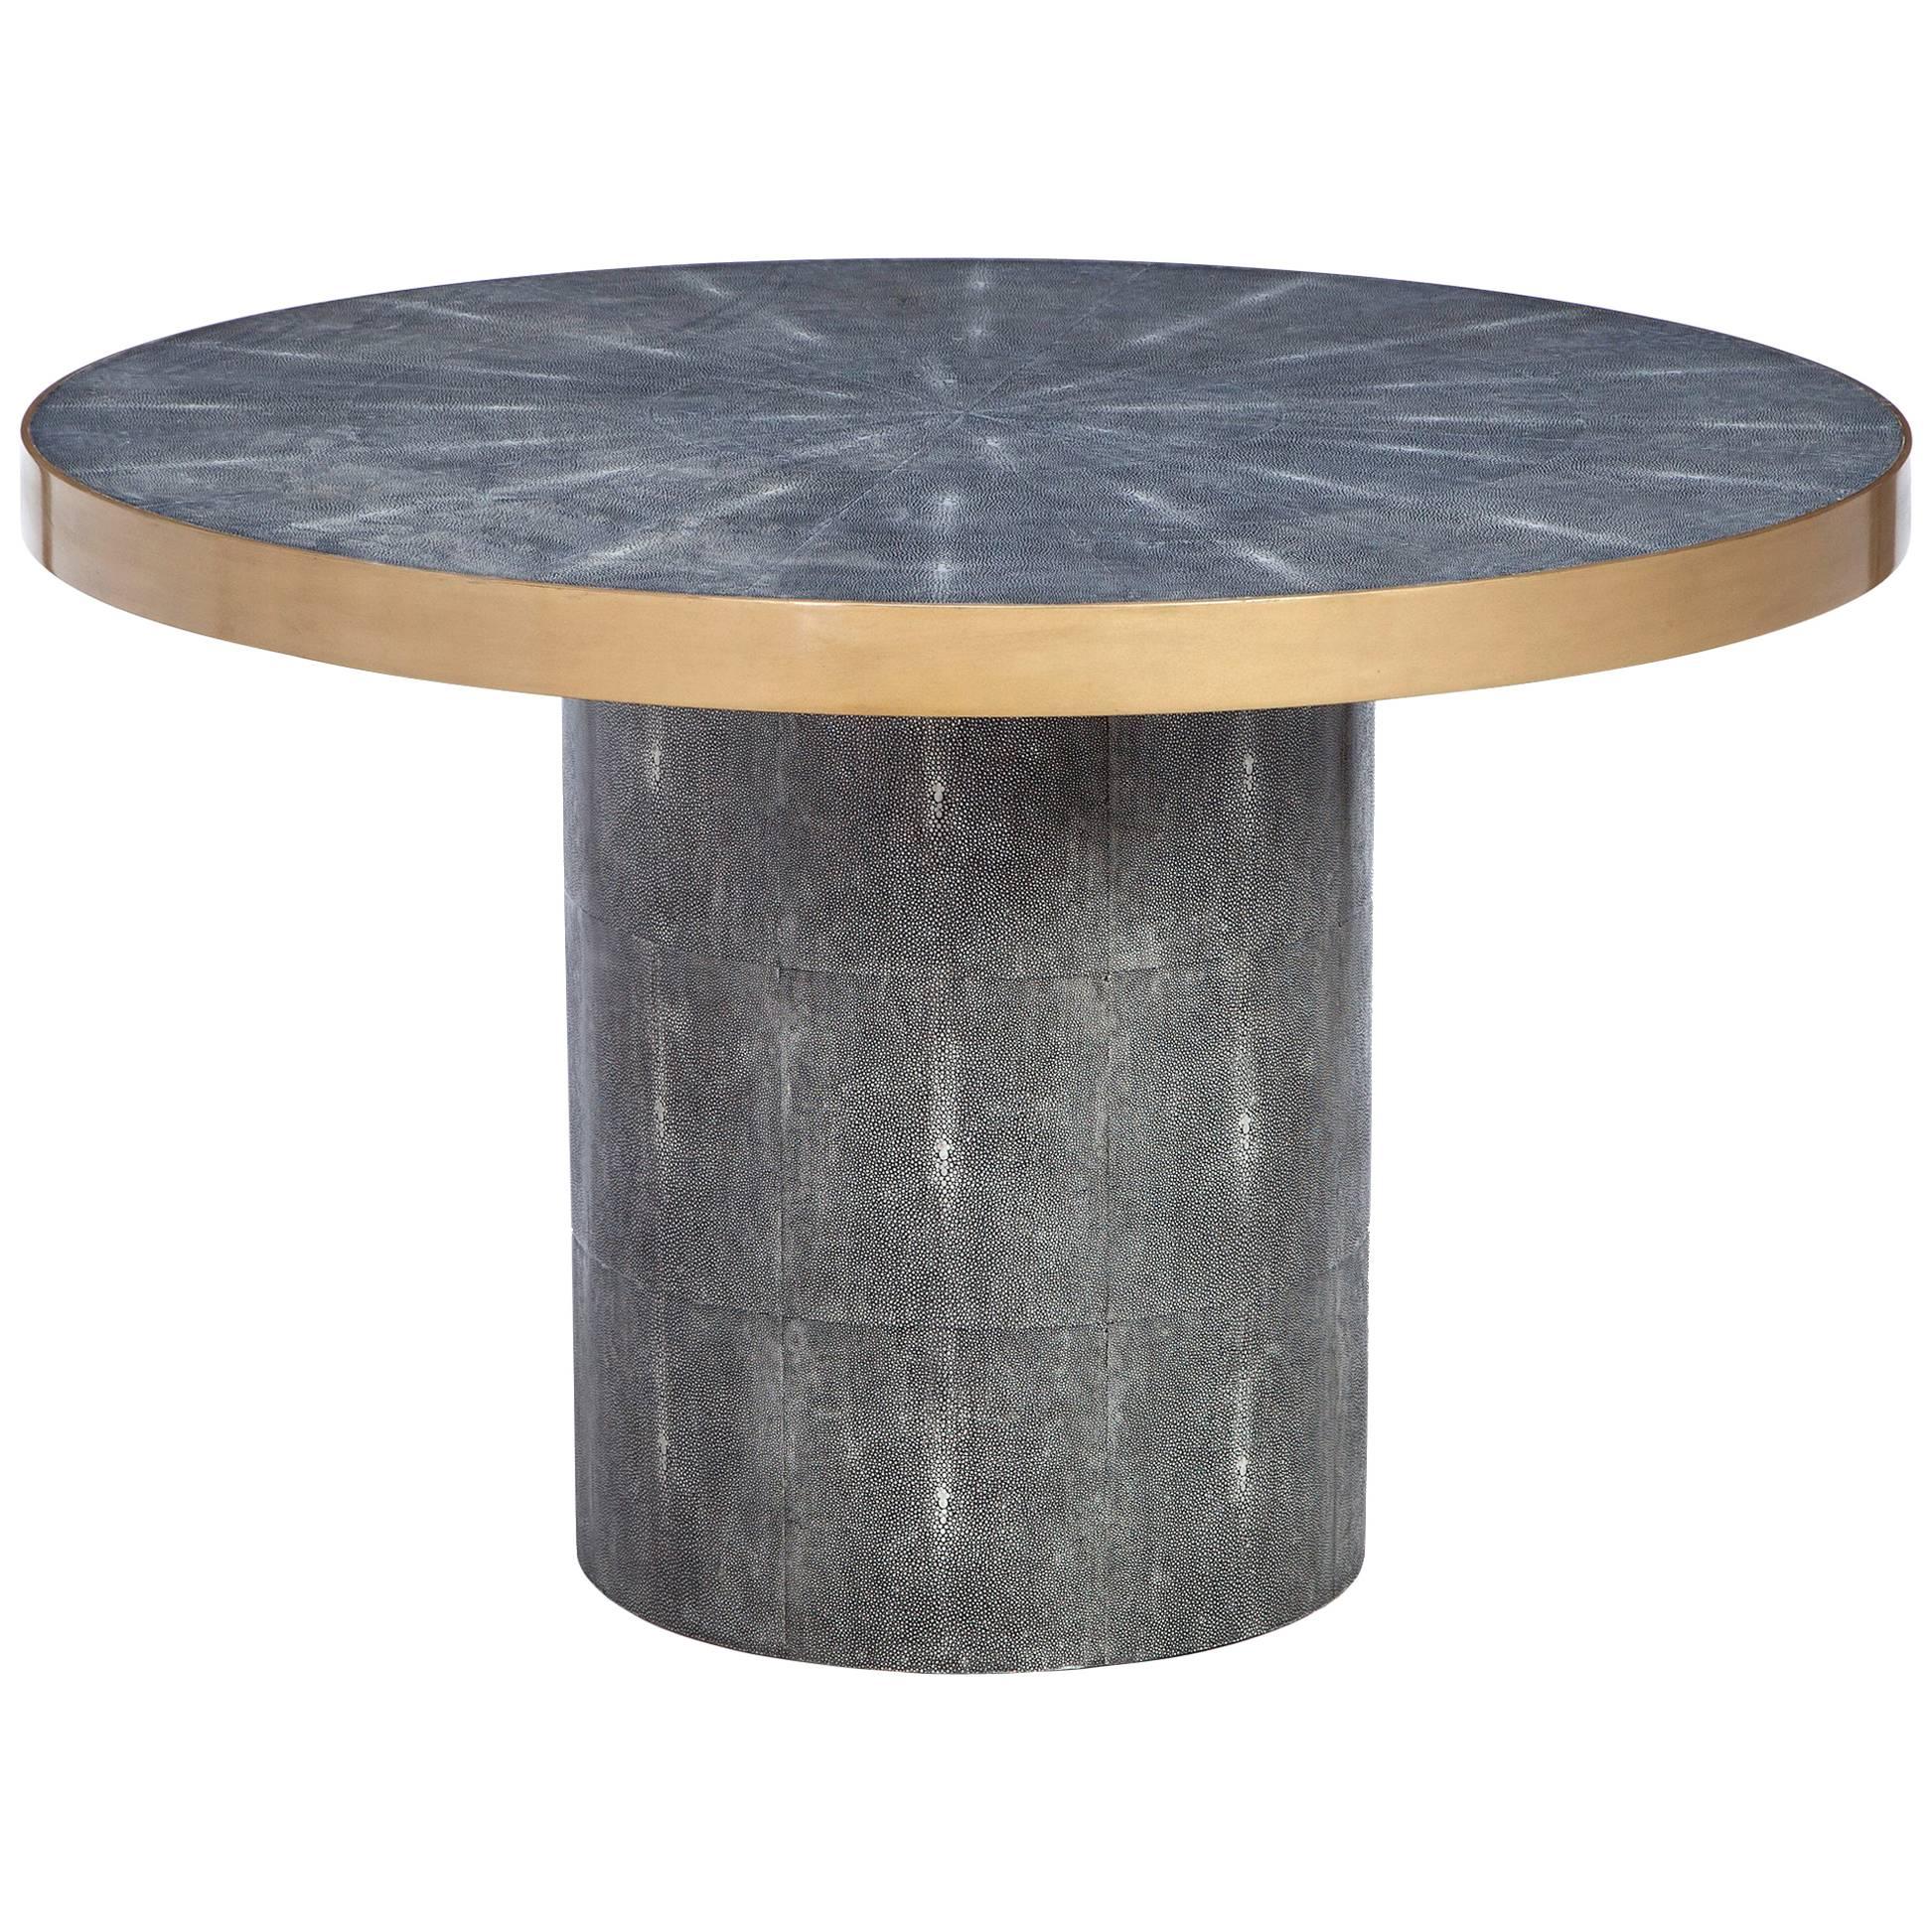 Faux Shagreen Table For Sale